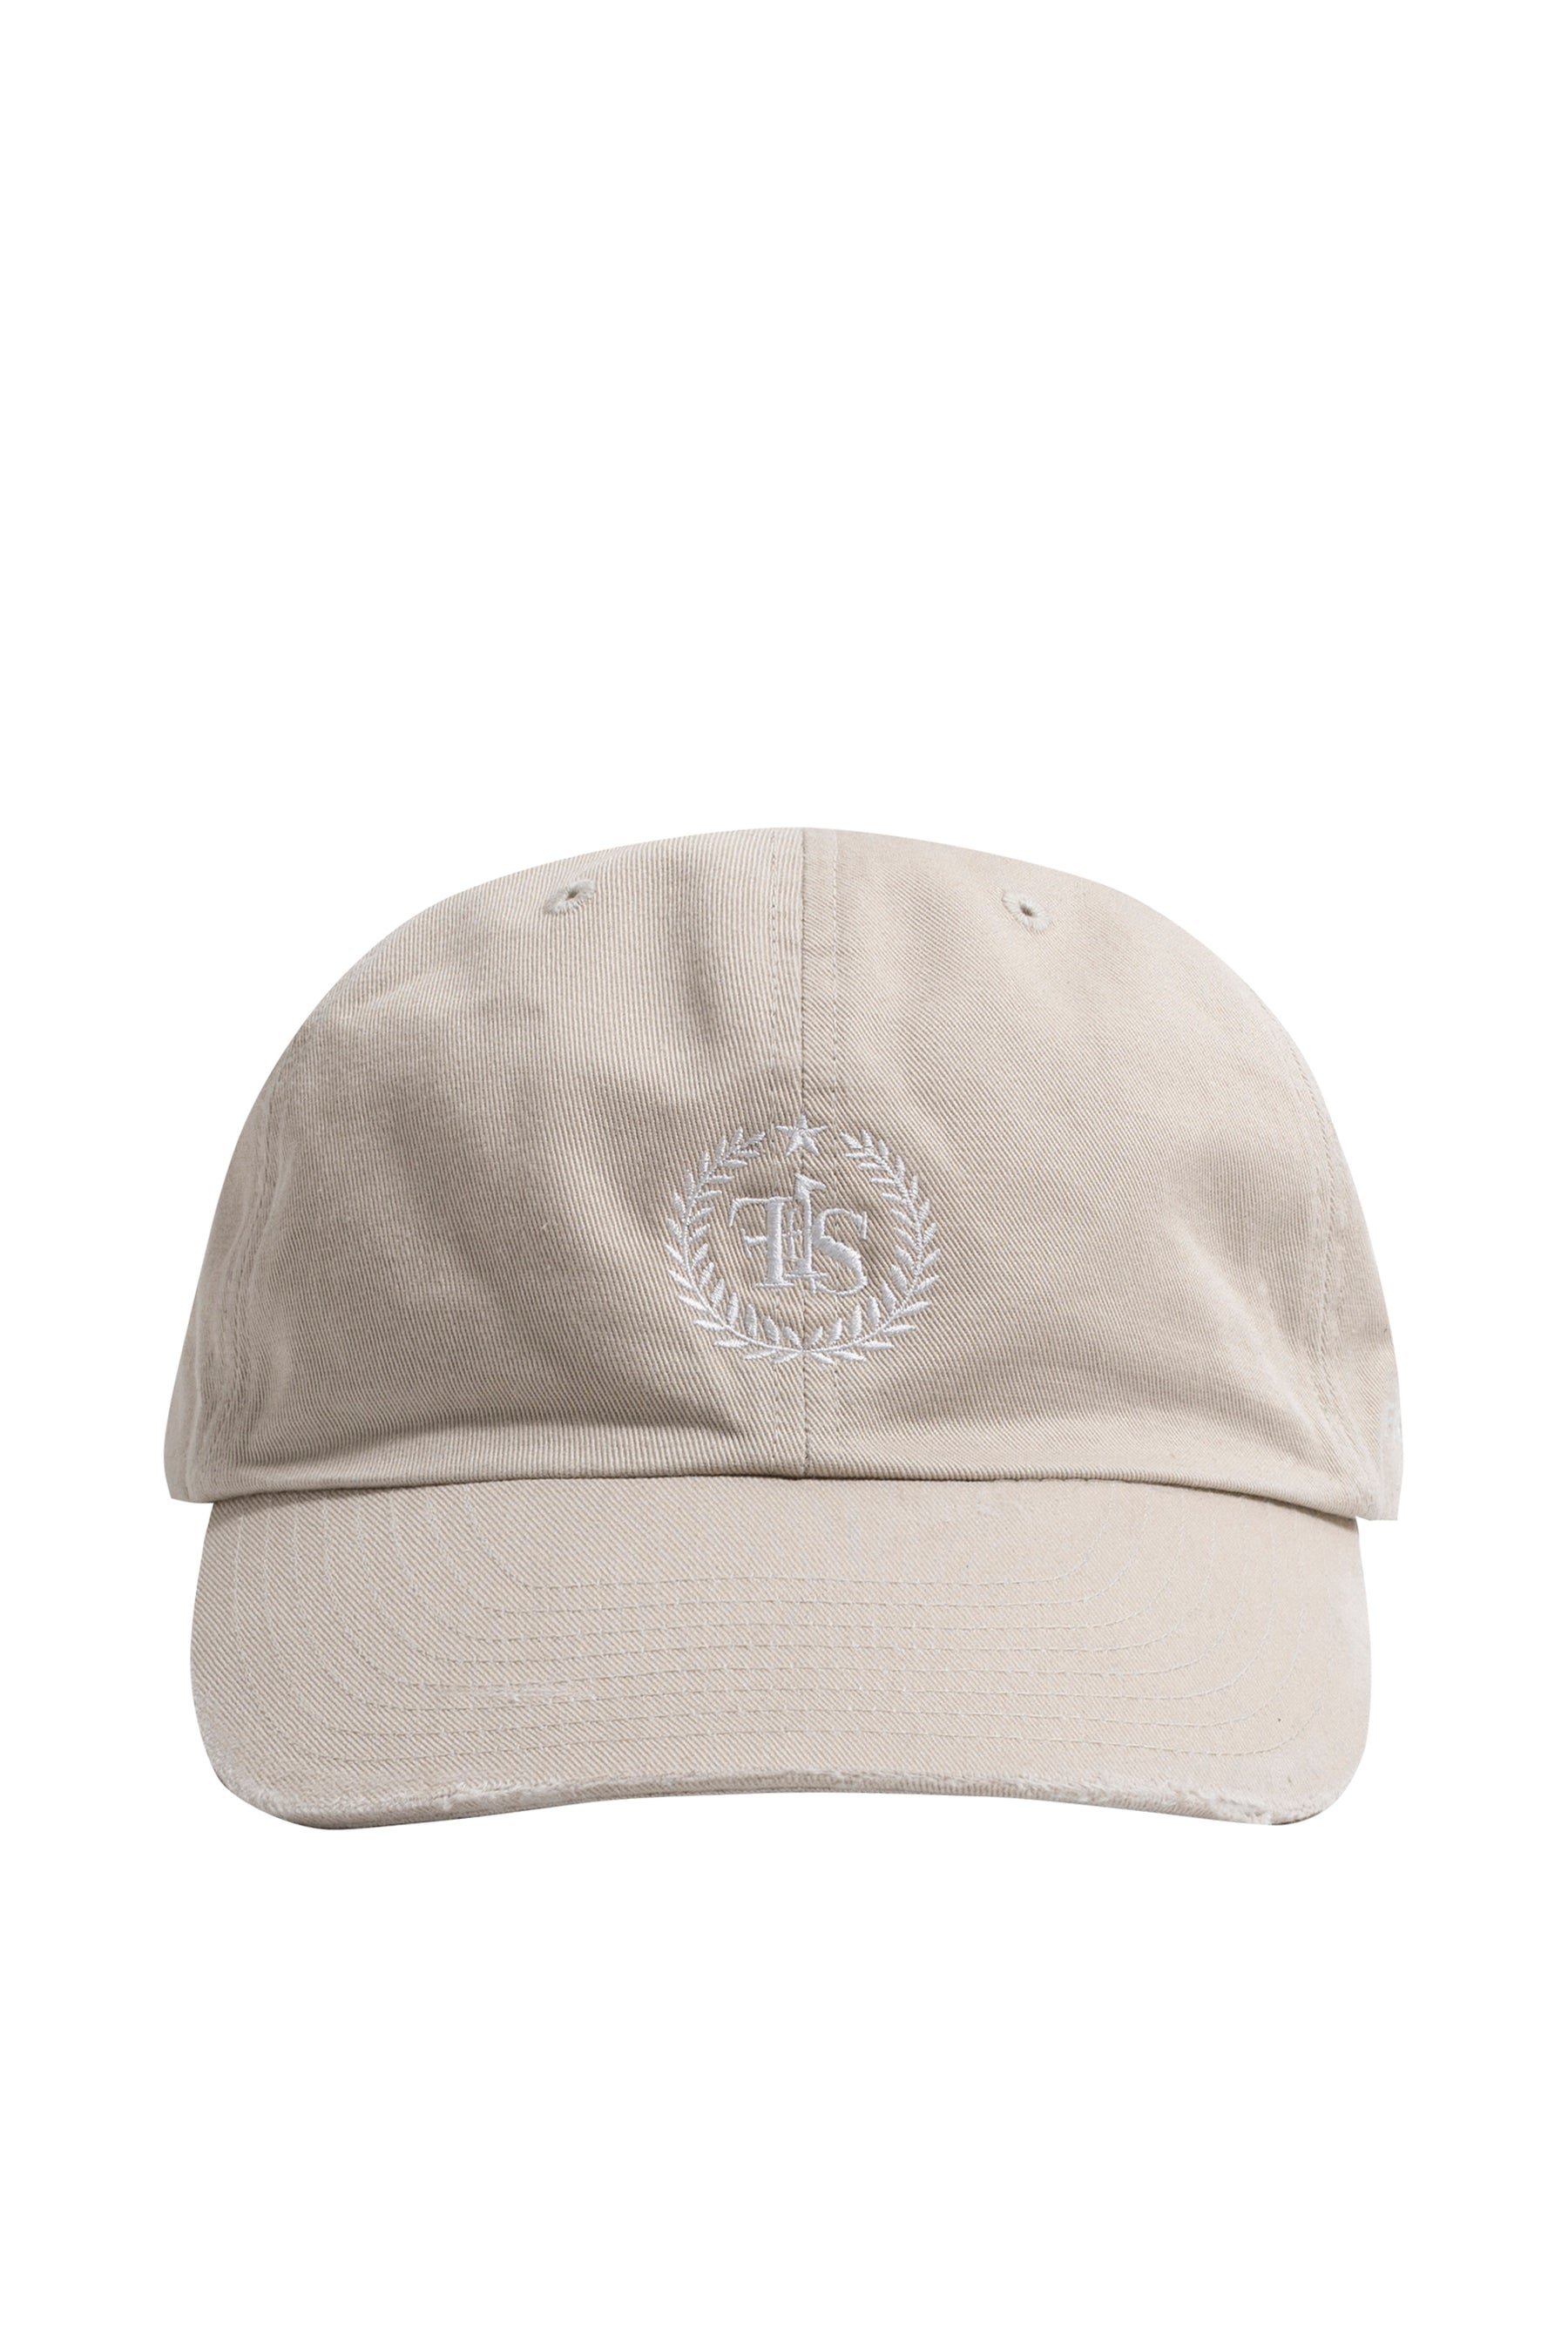 FORSOMEONE SS23 WASHED TWILL CAP / WHT - NUBIAN